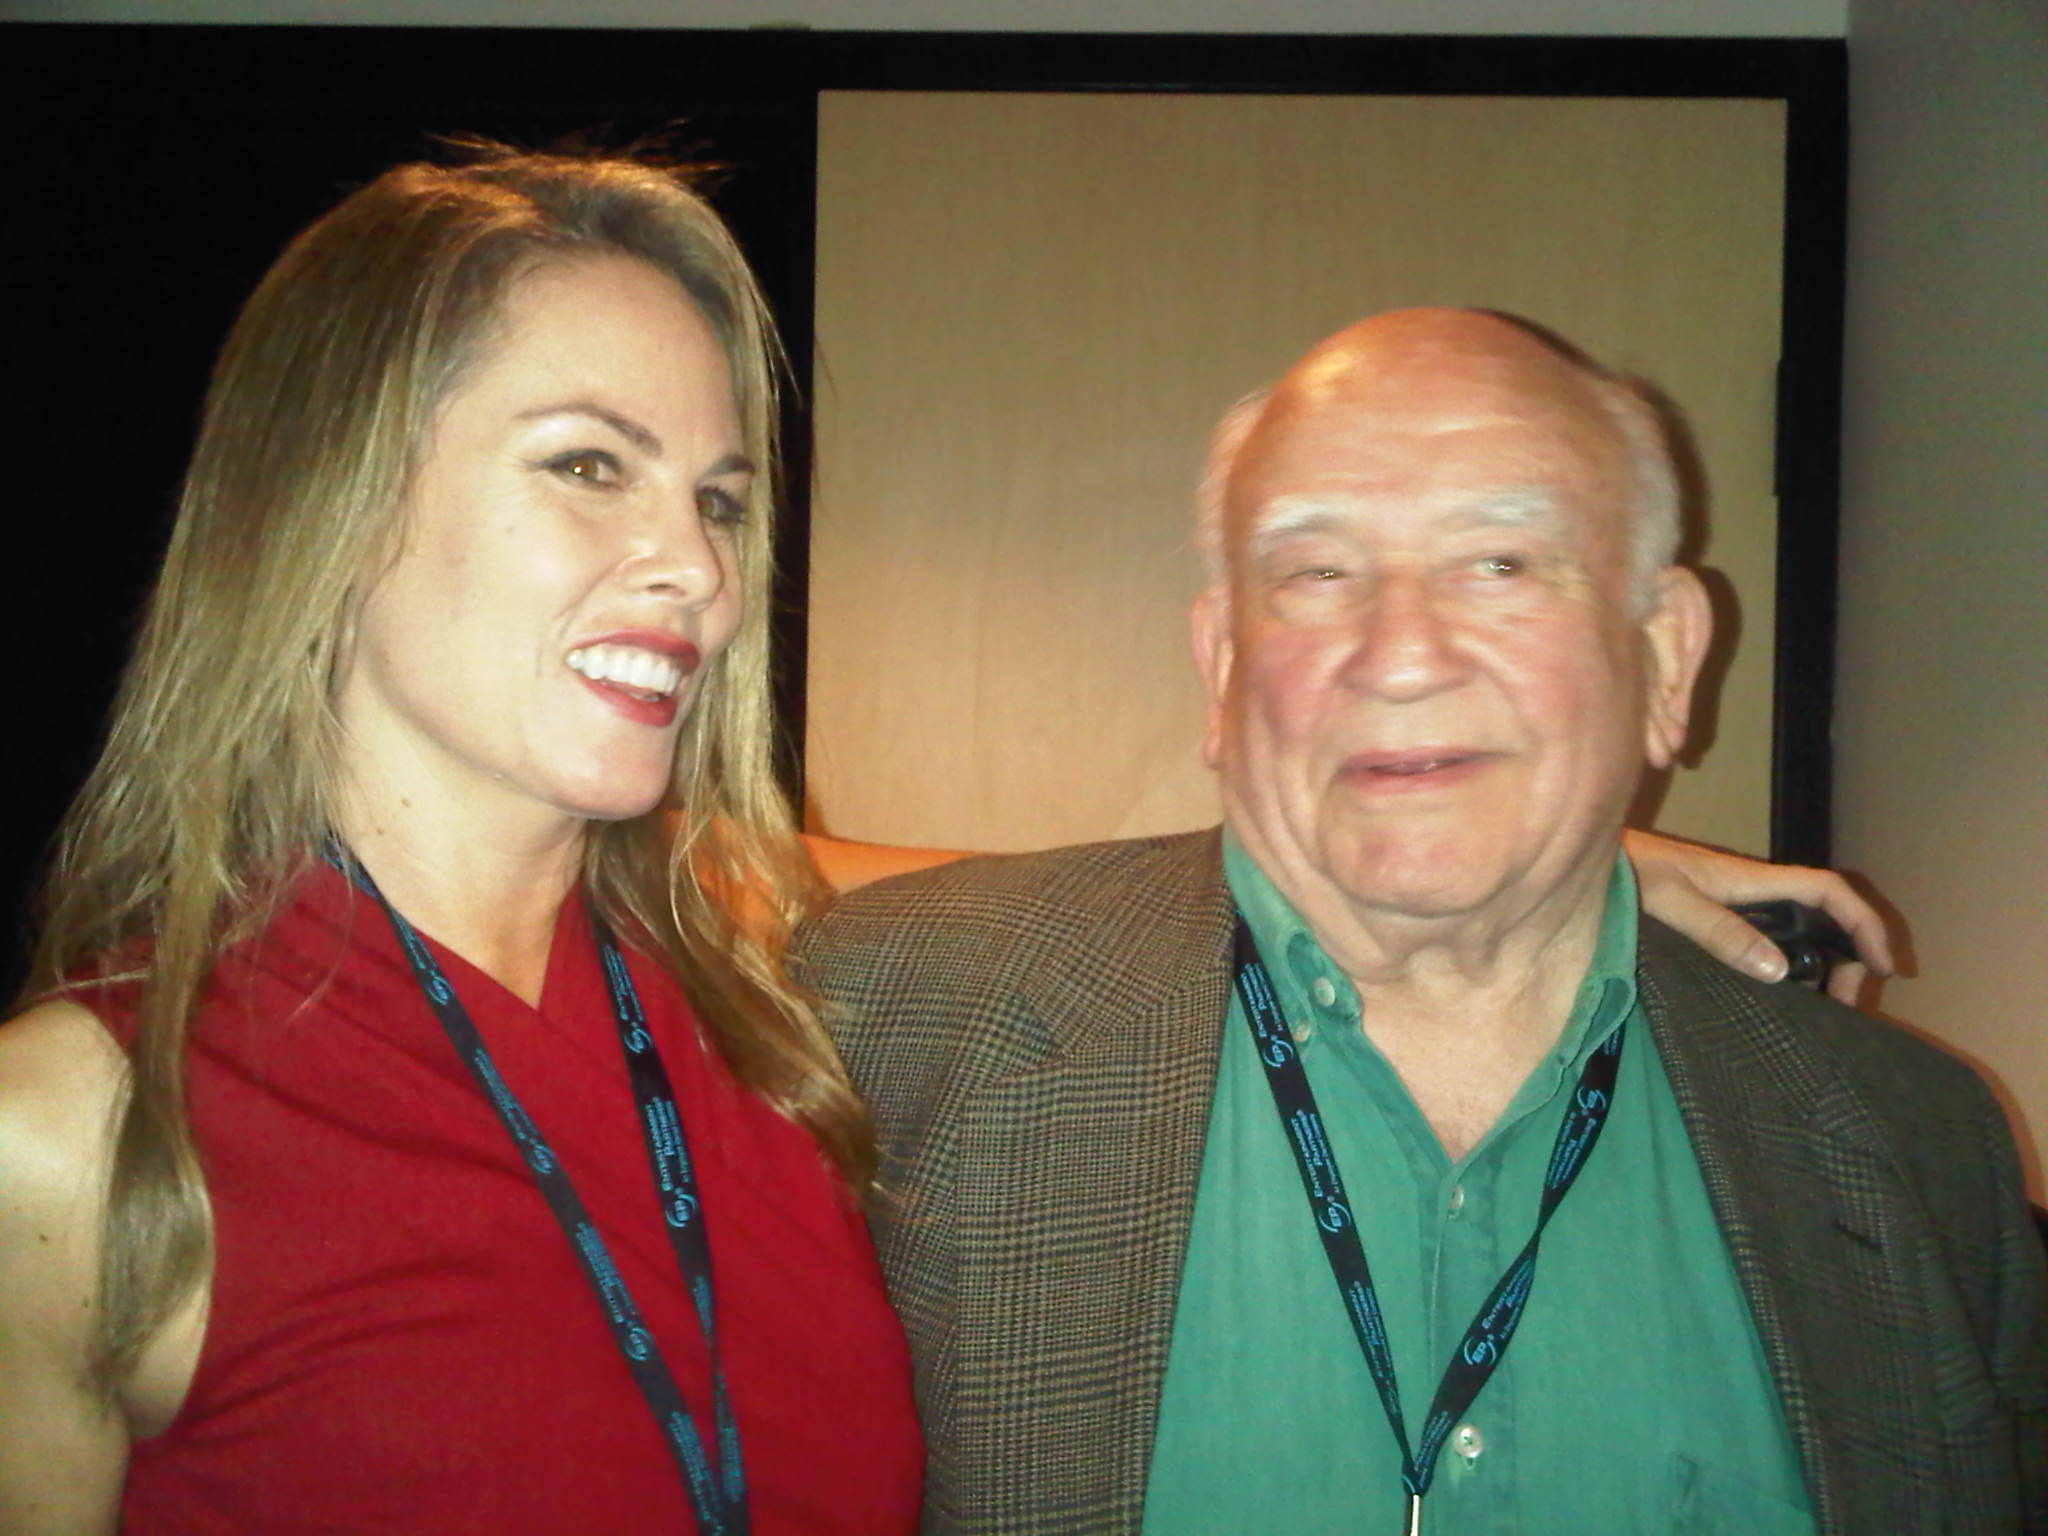 Ed Asner and Christy Oldham at The 2011 Burbank International Film Festival